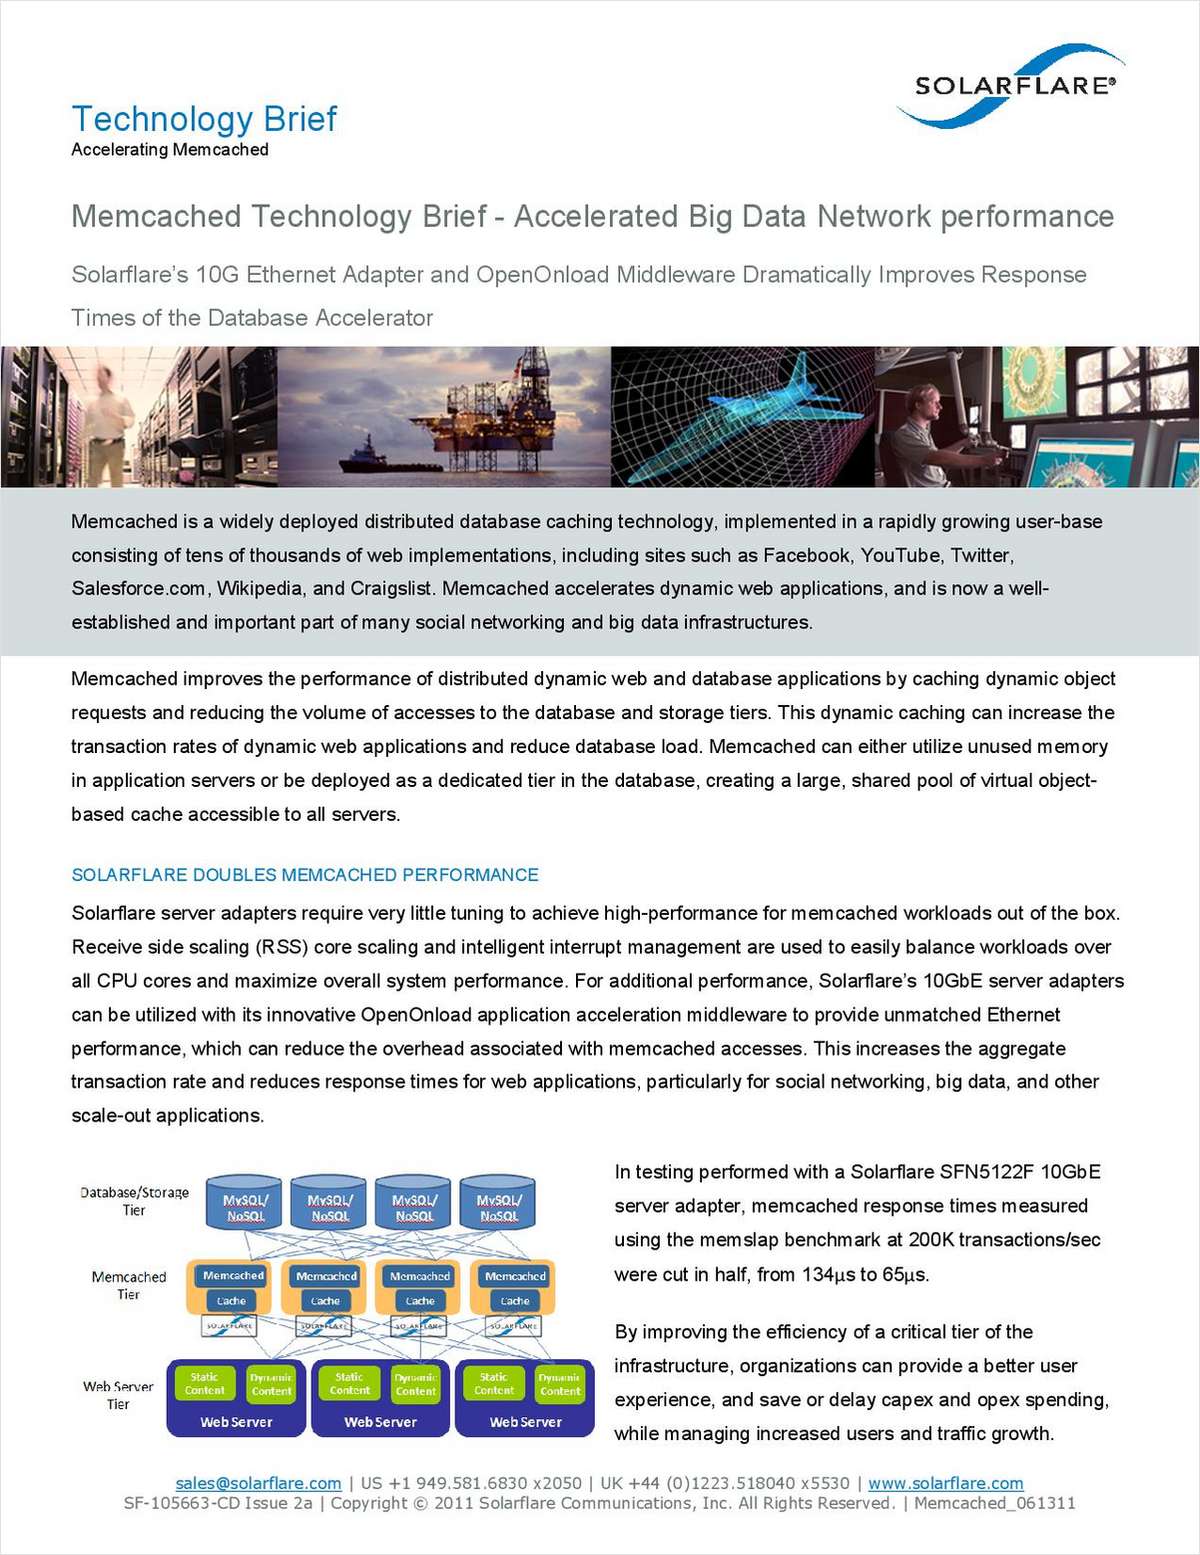 Memcached Technology Brief - Accelerating Web 2.0 Application Performance